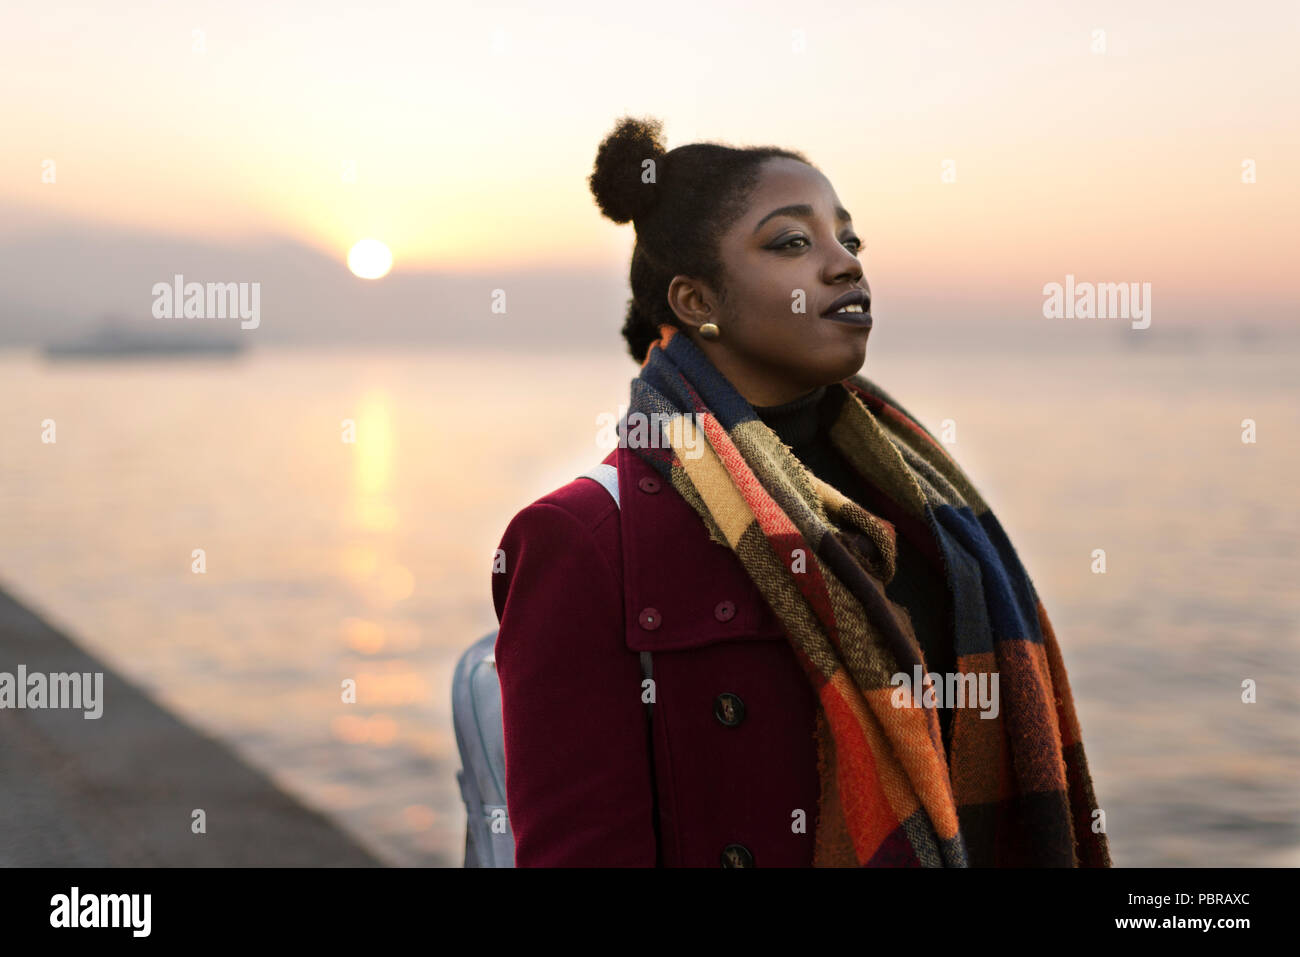 Portrait of a 25 years old African woman with a red coat and weft near to the waters edge with a sunset. Stock Photo